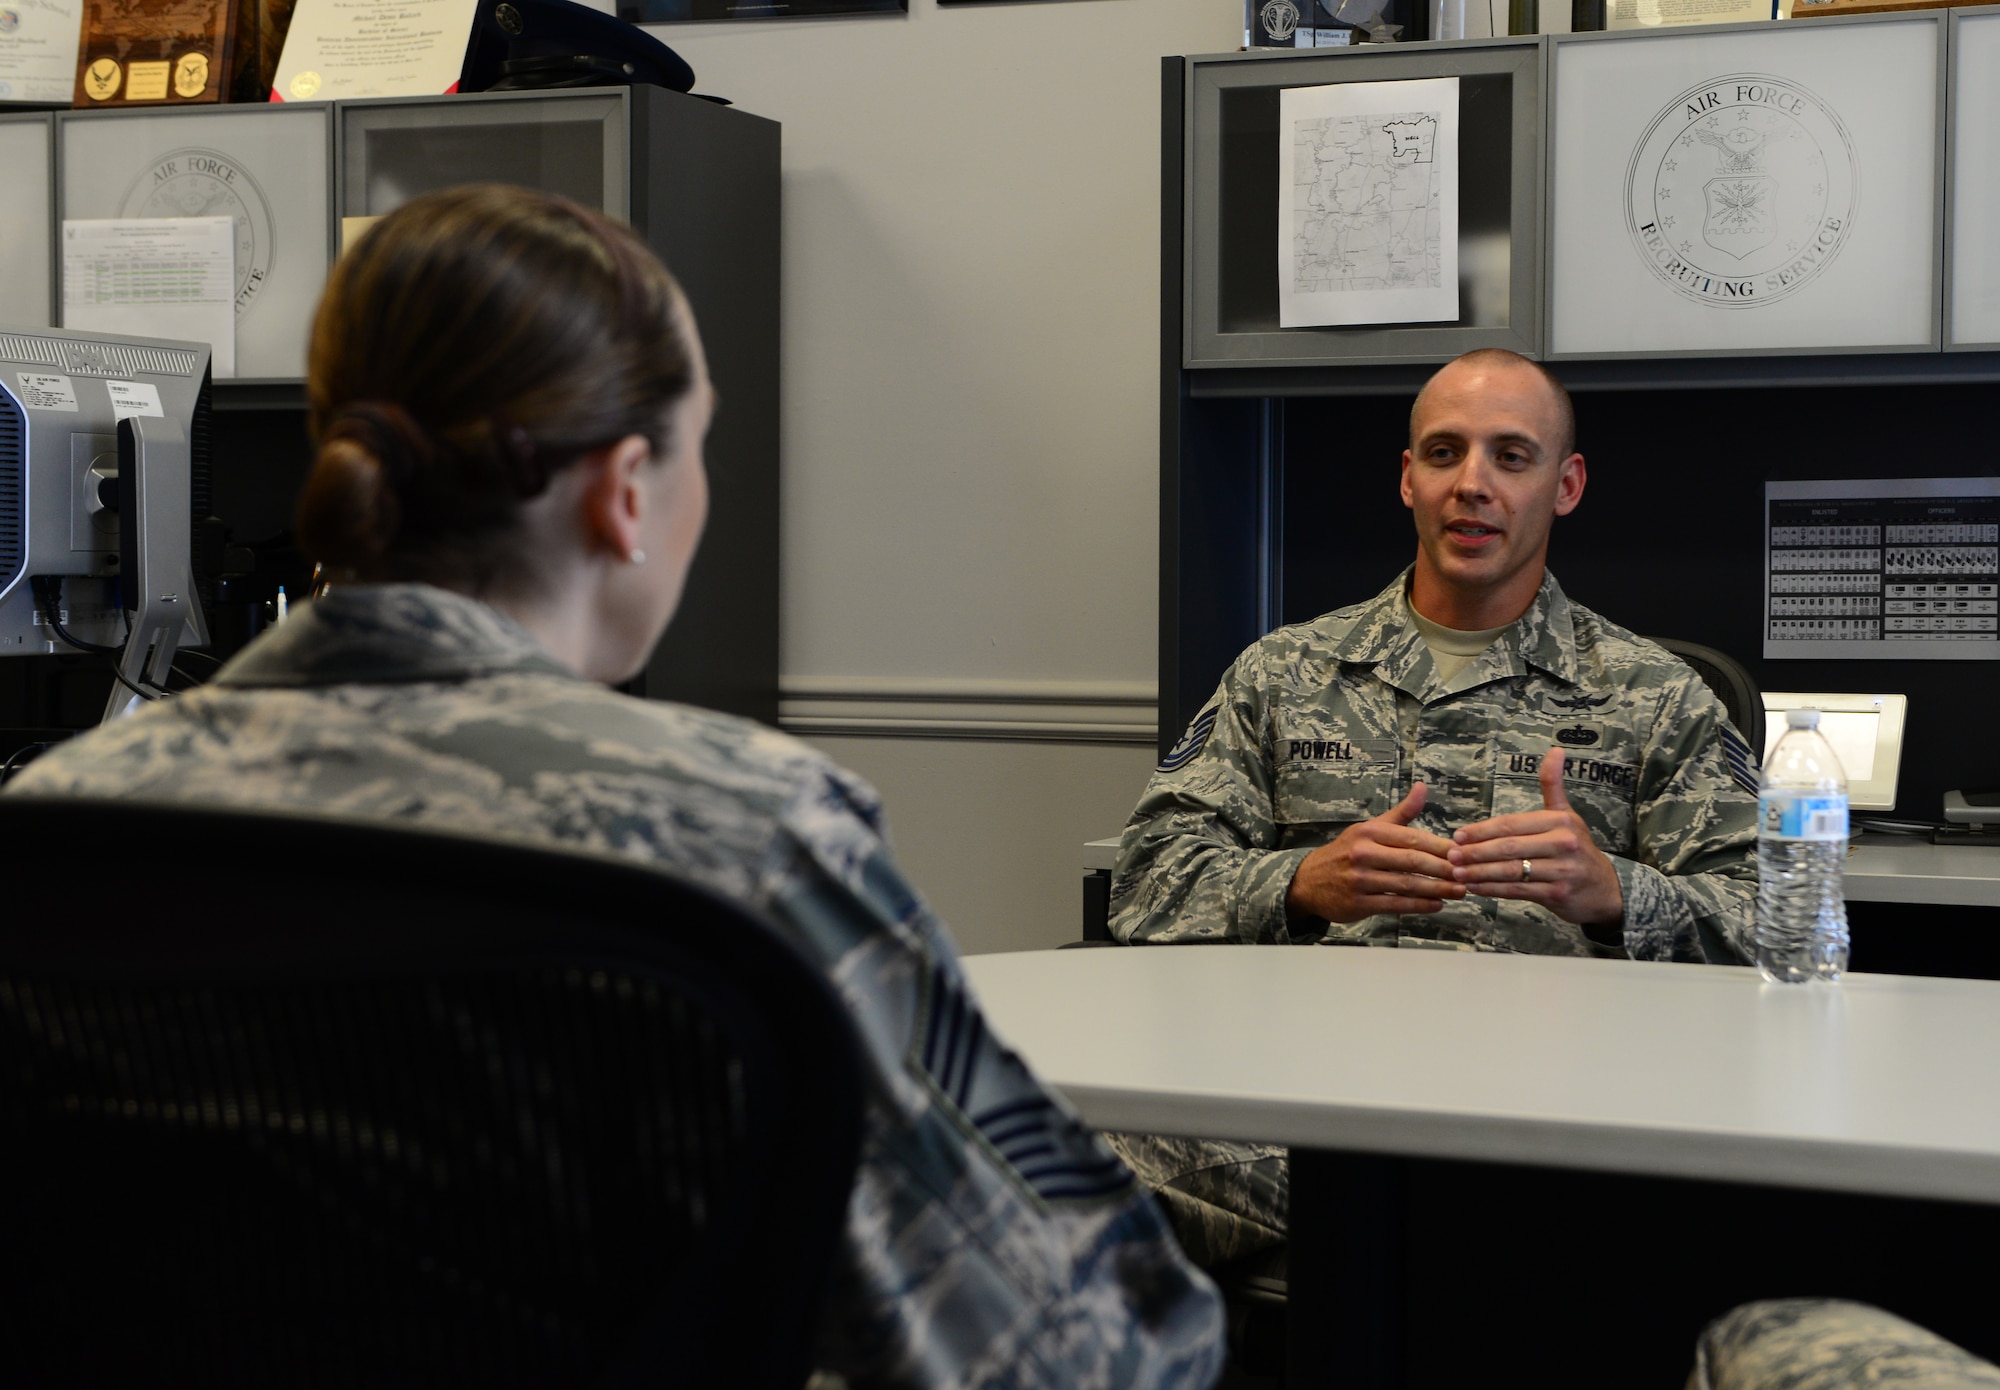 U.S. Air Force Chief Master Sgt. Juliet Gudgel, command chief of Air Education and Training Command, speaks with Tech. Sgt. William Powell, 331st Recruiting Squadron enlisted recruiter, at the local recruiting office in Columbus, Mississippi, June 21, 2018. Gudgel asked Powell about what she and her team could do to make people more interested in joining the Air Force. (U.S. Air Force photo by Airman 1st Class Beaux Hebert)